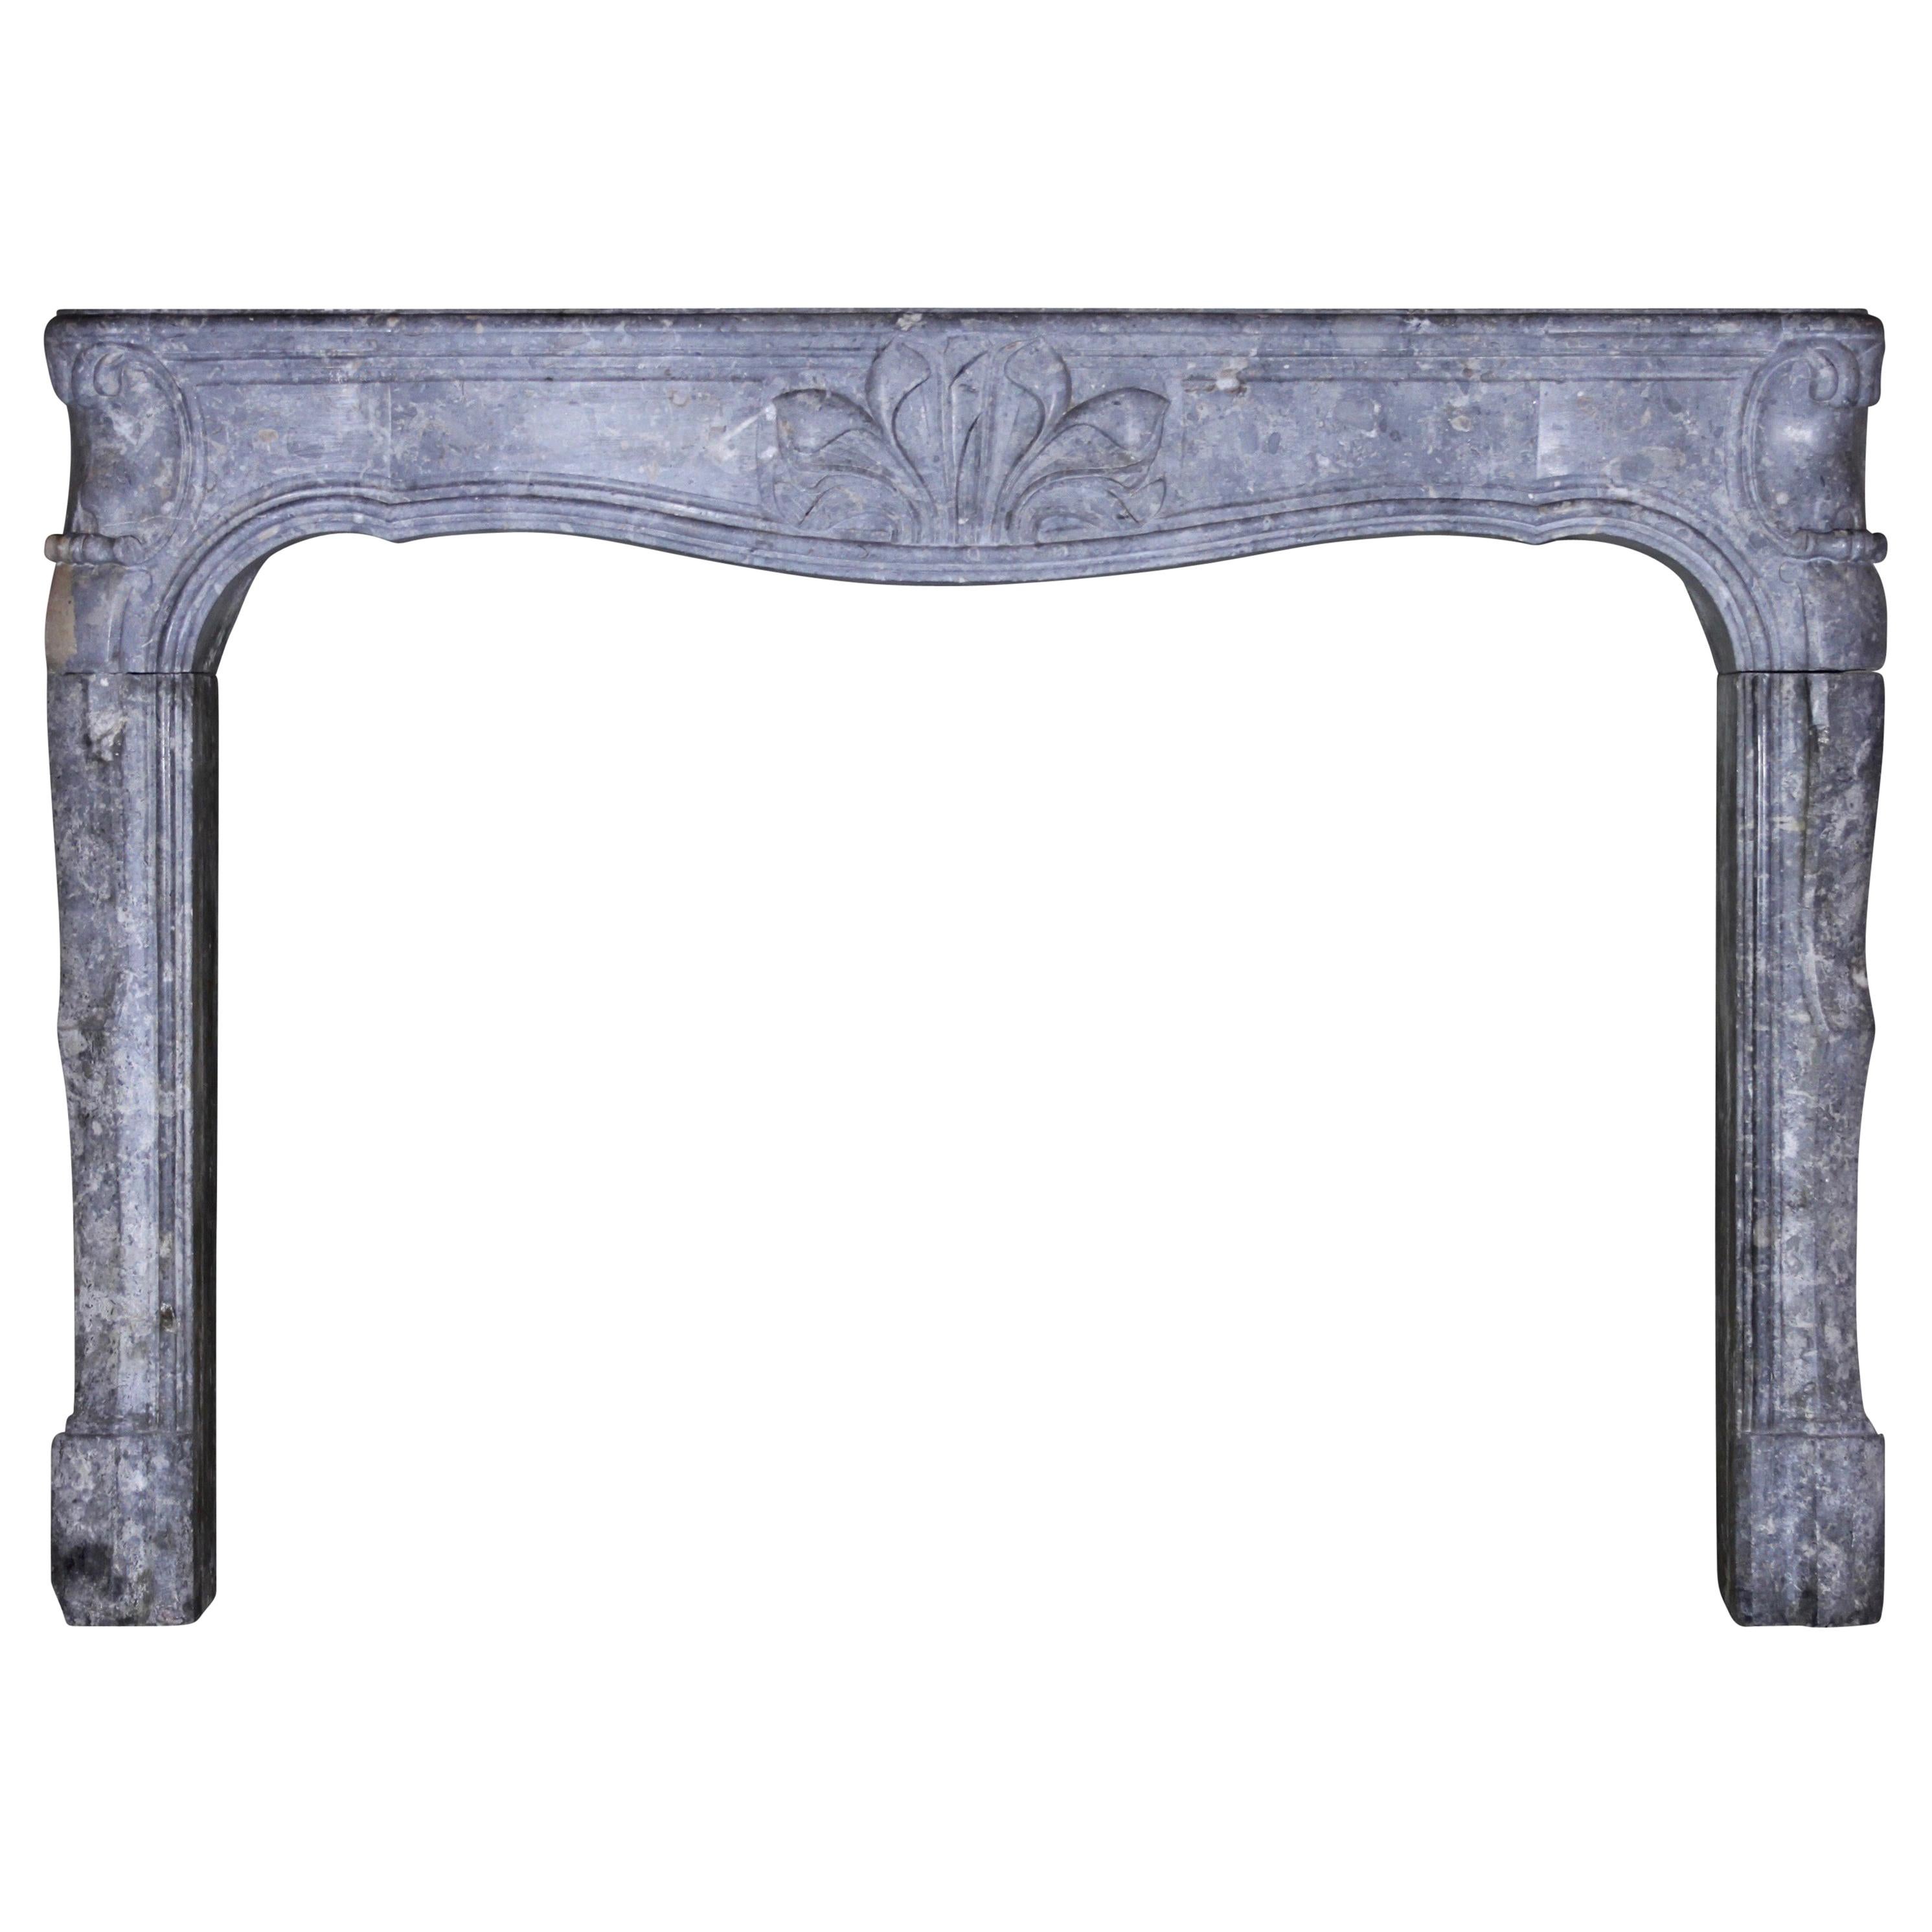 Fine 18th Century French Antique Fireplace Surround in Bicolor Burgundy Stone For Sale